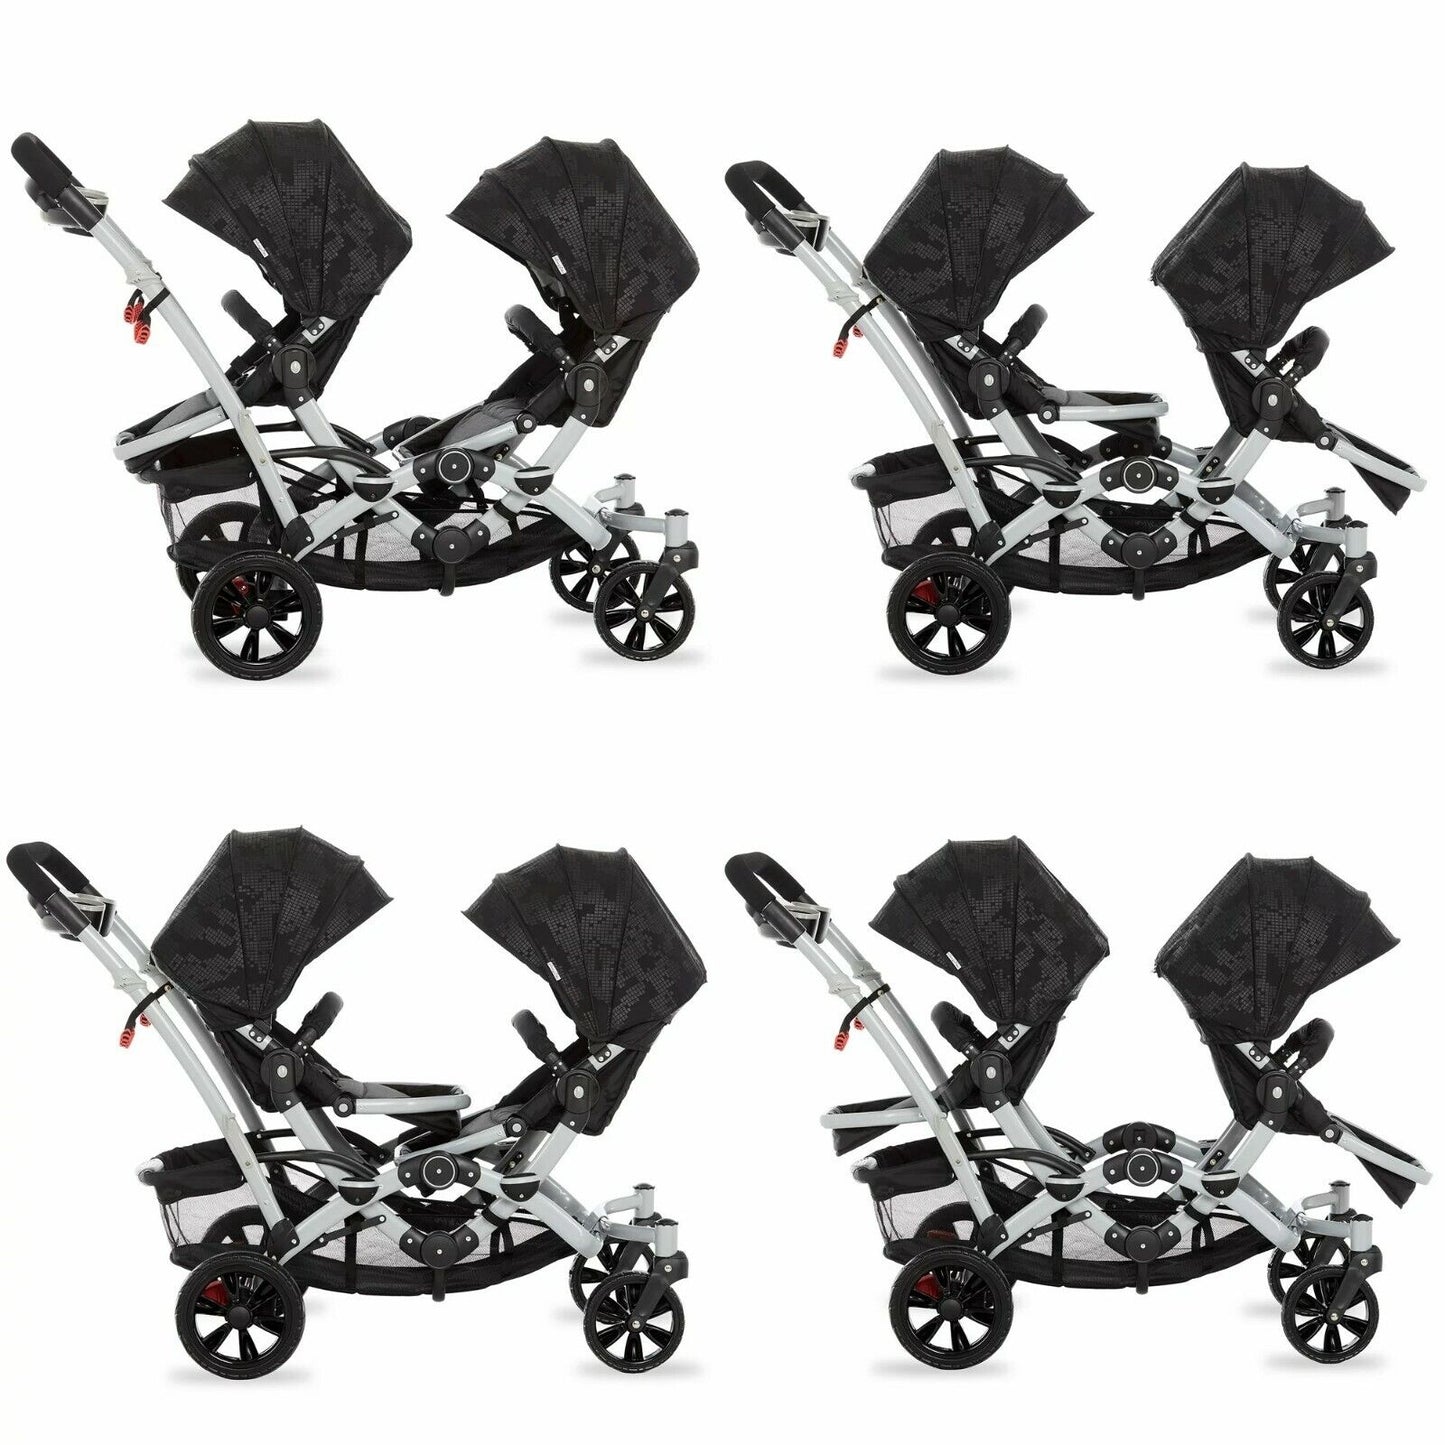 Double Baby Stroller Multi-position Lightweight Twin Toddler Foldable Travel Set